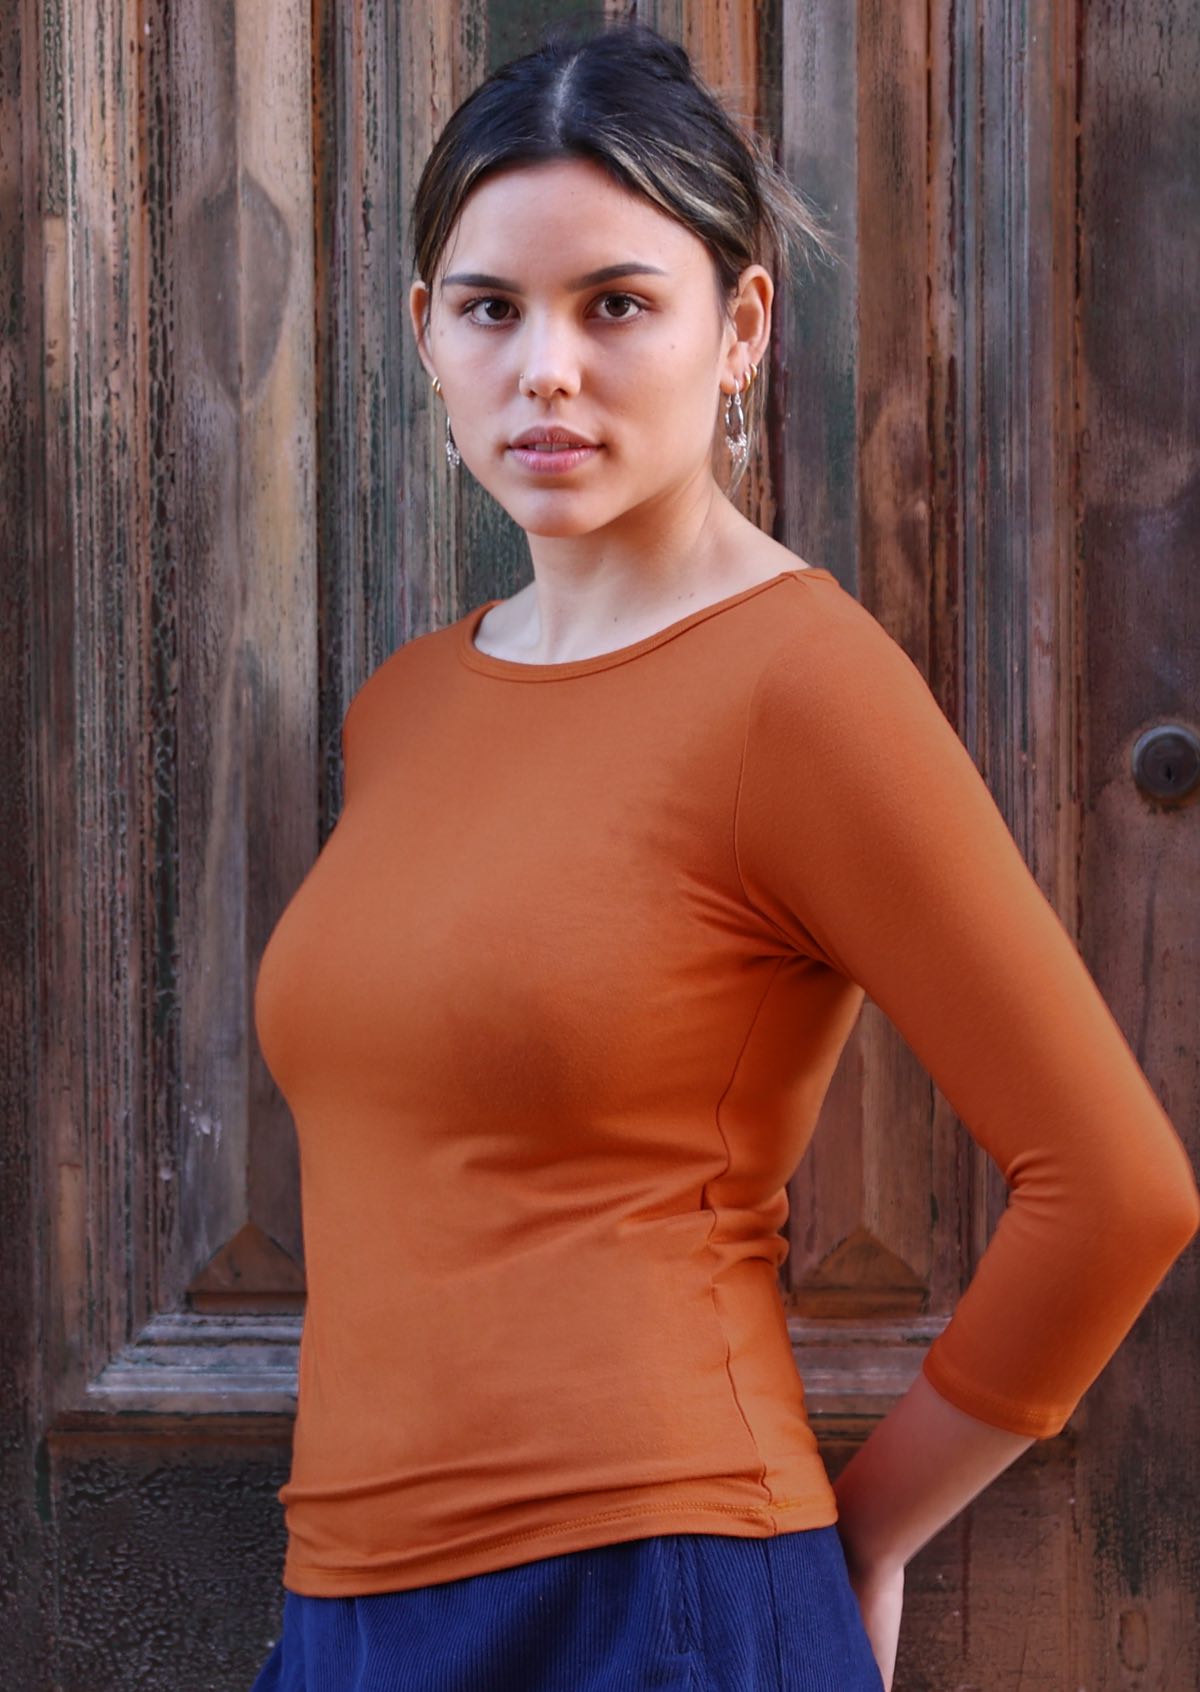 Woman with dark hair wearing a rayon boat neck orange 3/4 sleeve top.